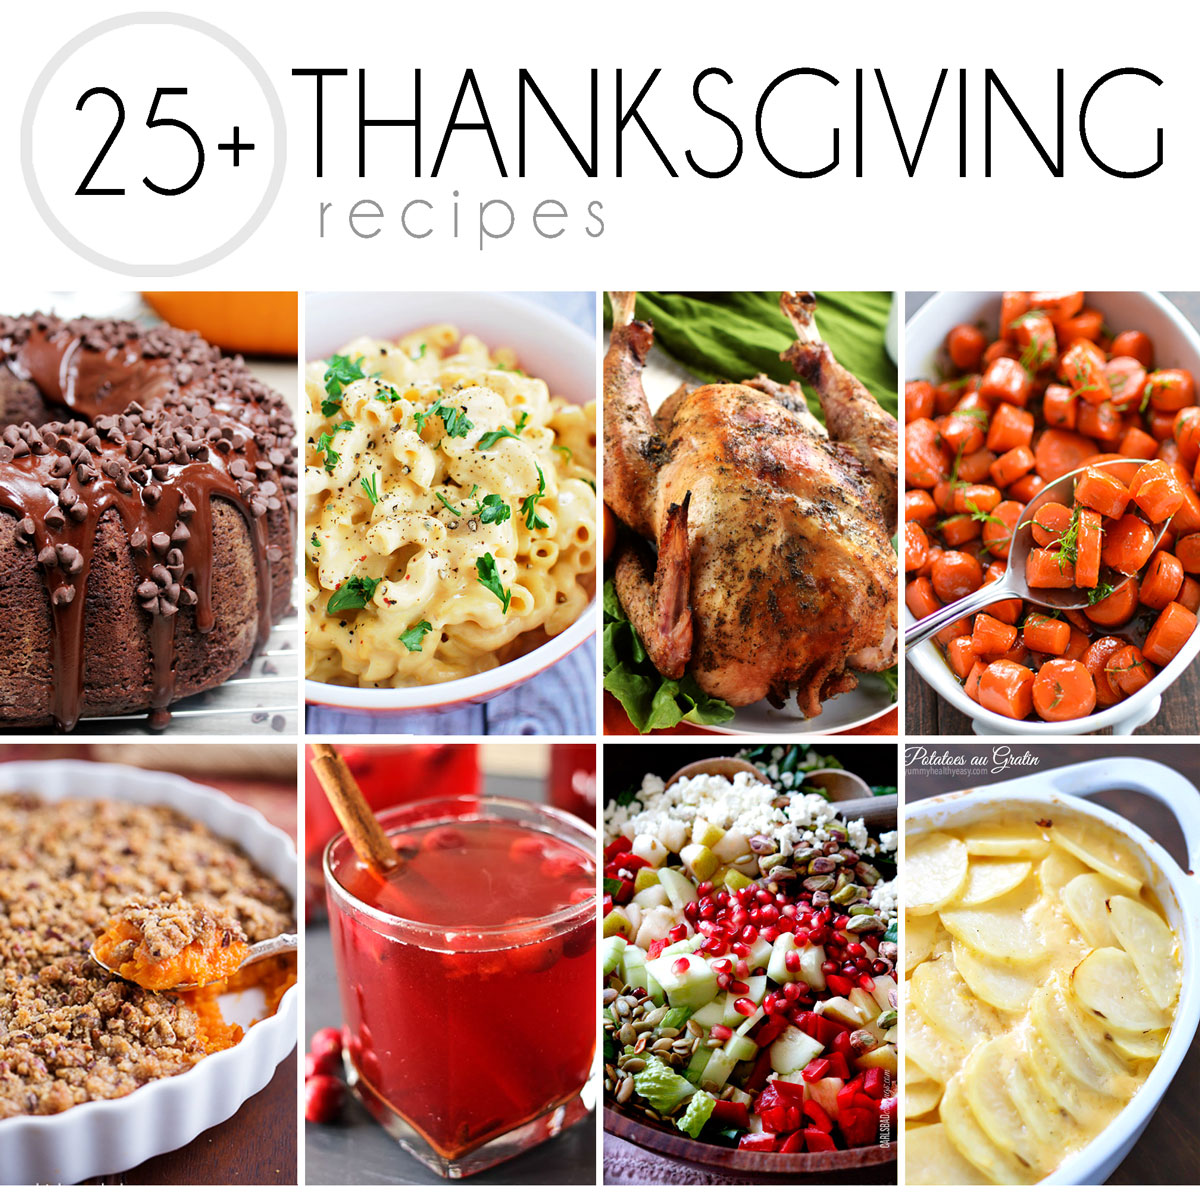 25+ Thanksgiving Recipes: a helpful guide to planning your Thanksgiving dinner!